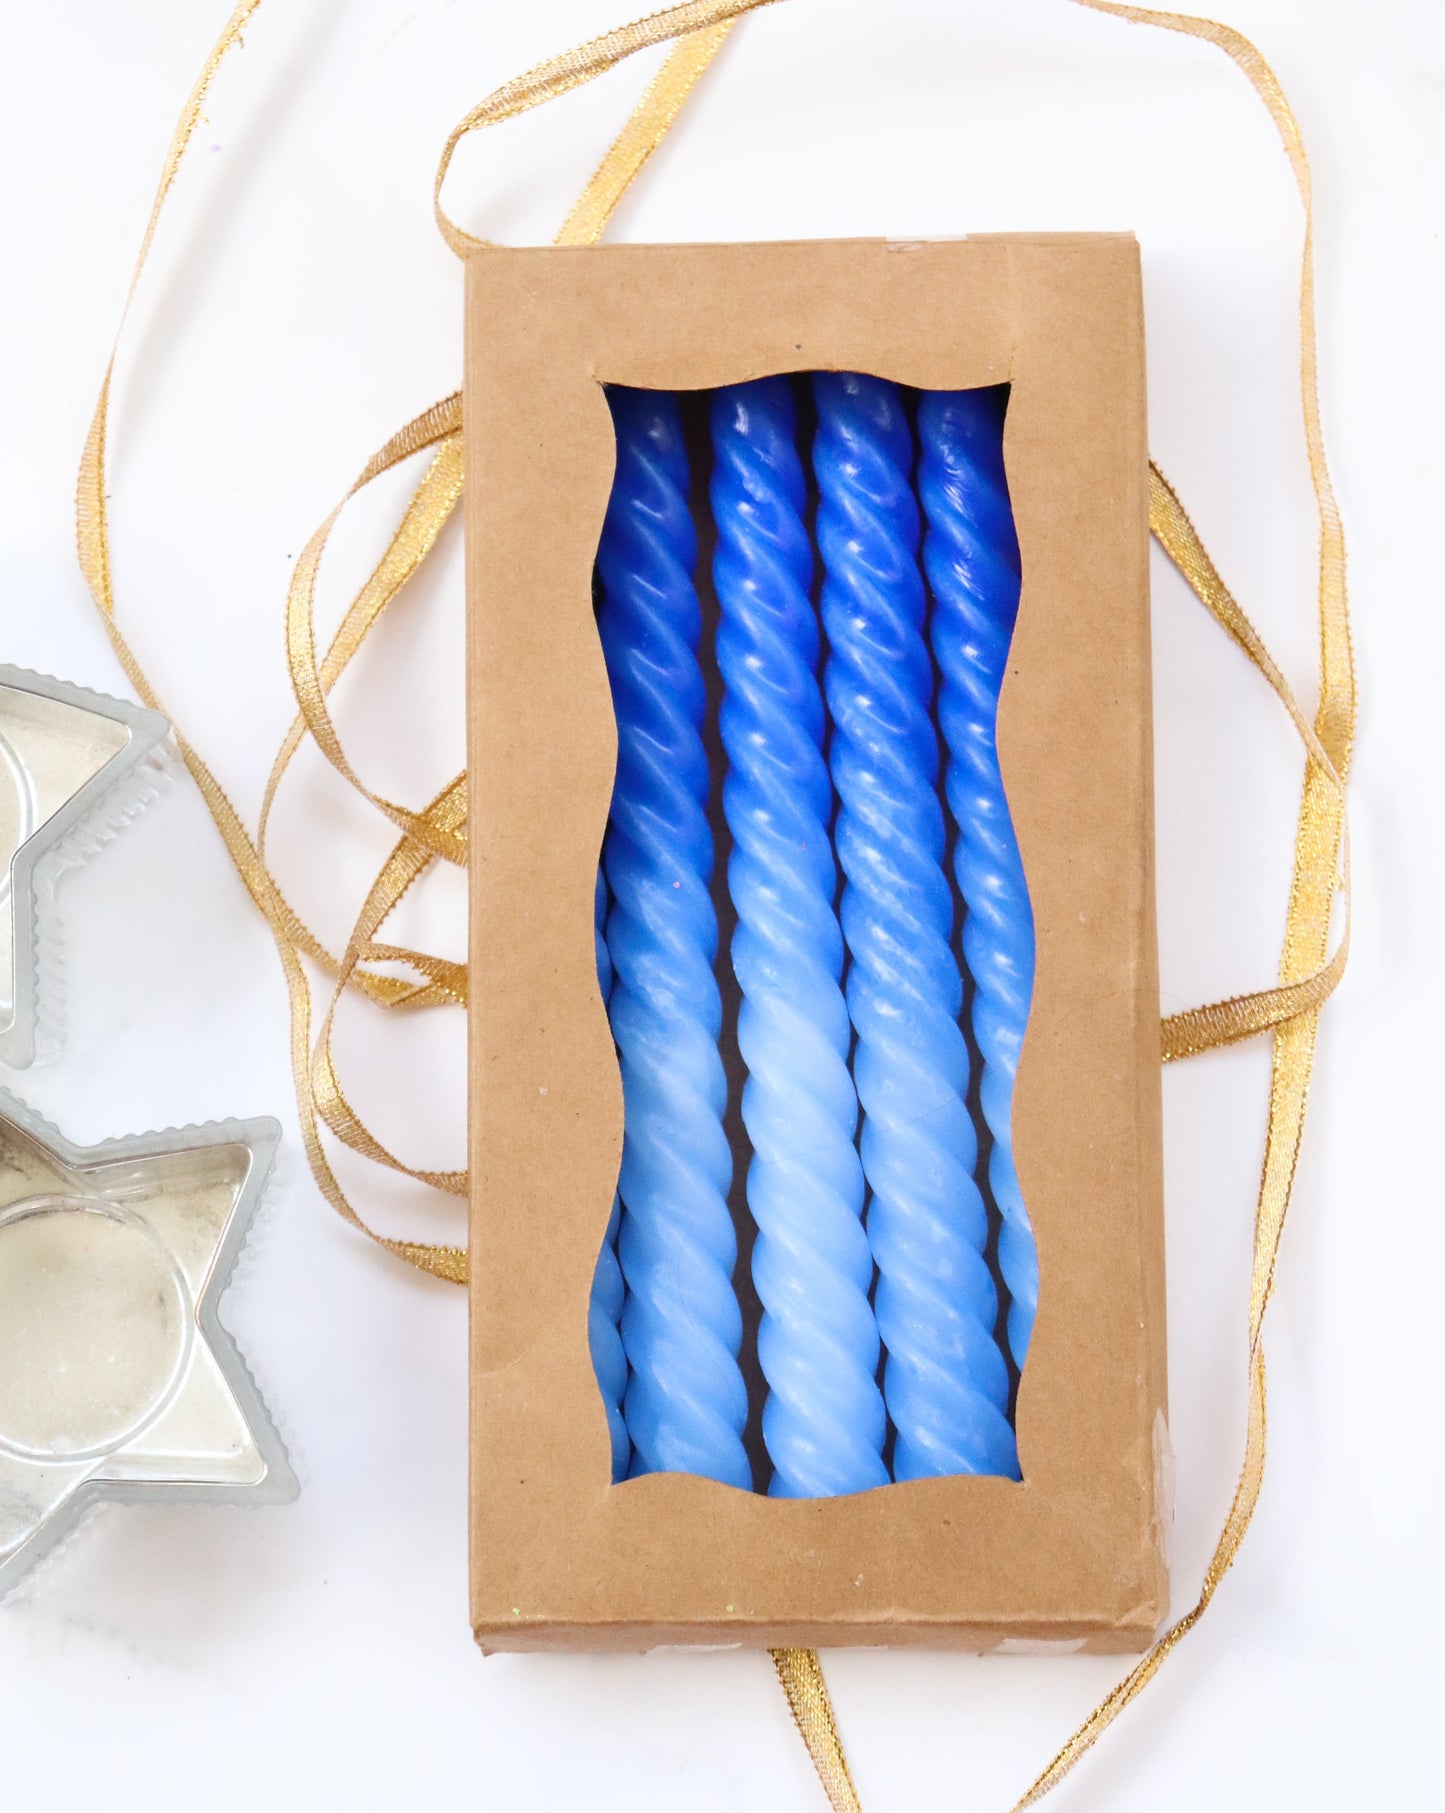 Twisted Candles - Dip dyed candles - Blue tapered candles